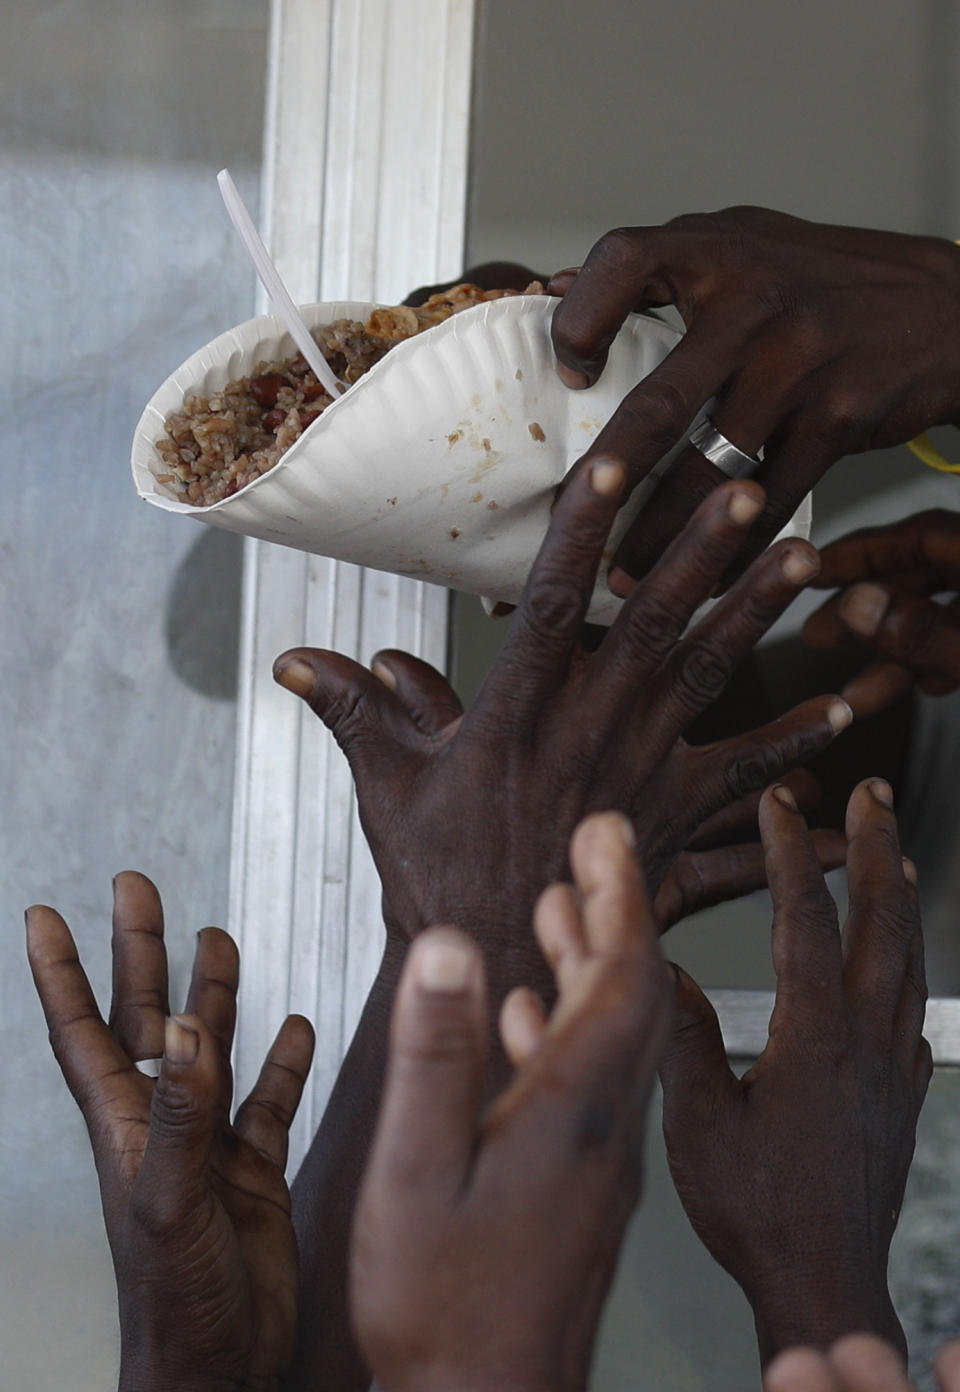 A man hands out a meal of beans and rice during a federal government distribution of food and school supplies to some residents of Cite Soleil, in Port-au-Prince, Haiti, Thursday, Oct. 3, 2019. The daily struggles of Haitians have only become more acute as recent anti-government protests and roadblocks force the closure of businesses, sometimes permanently, as people lose jobs and dwindling incomes fall behind a spike in prices. (AP Photo/Rebecca Blackwell)